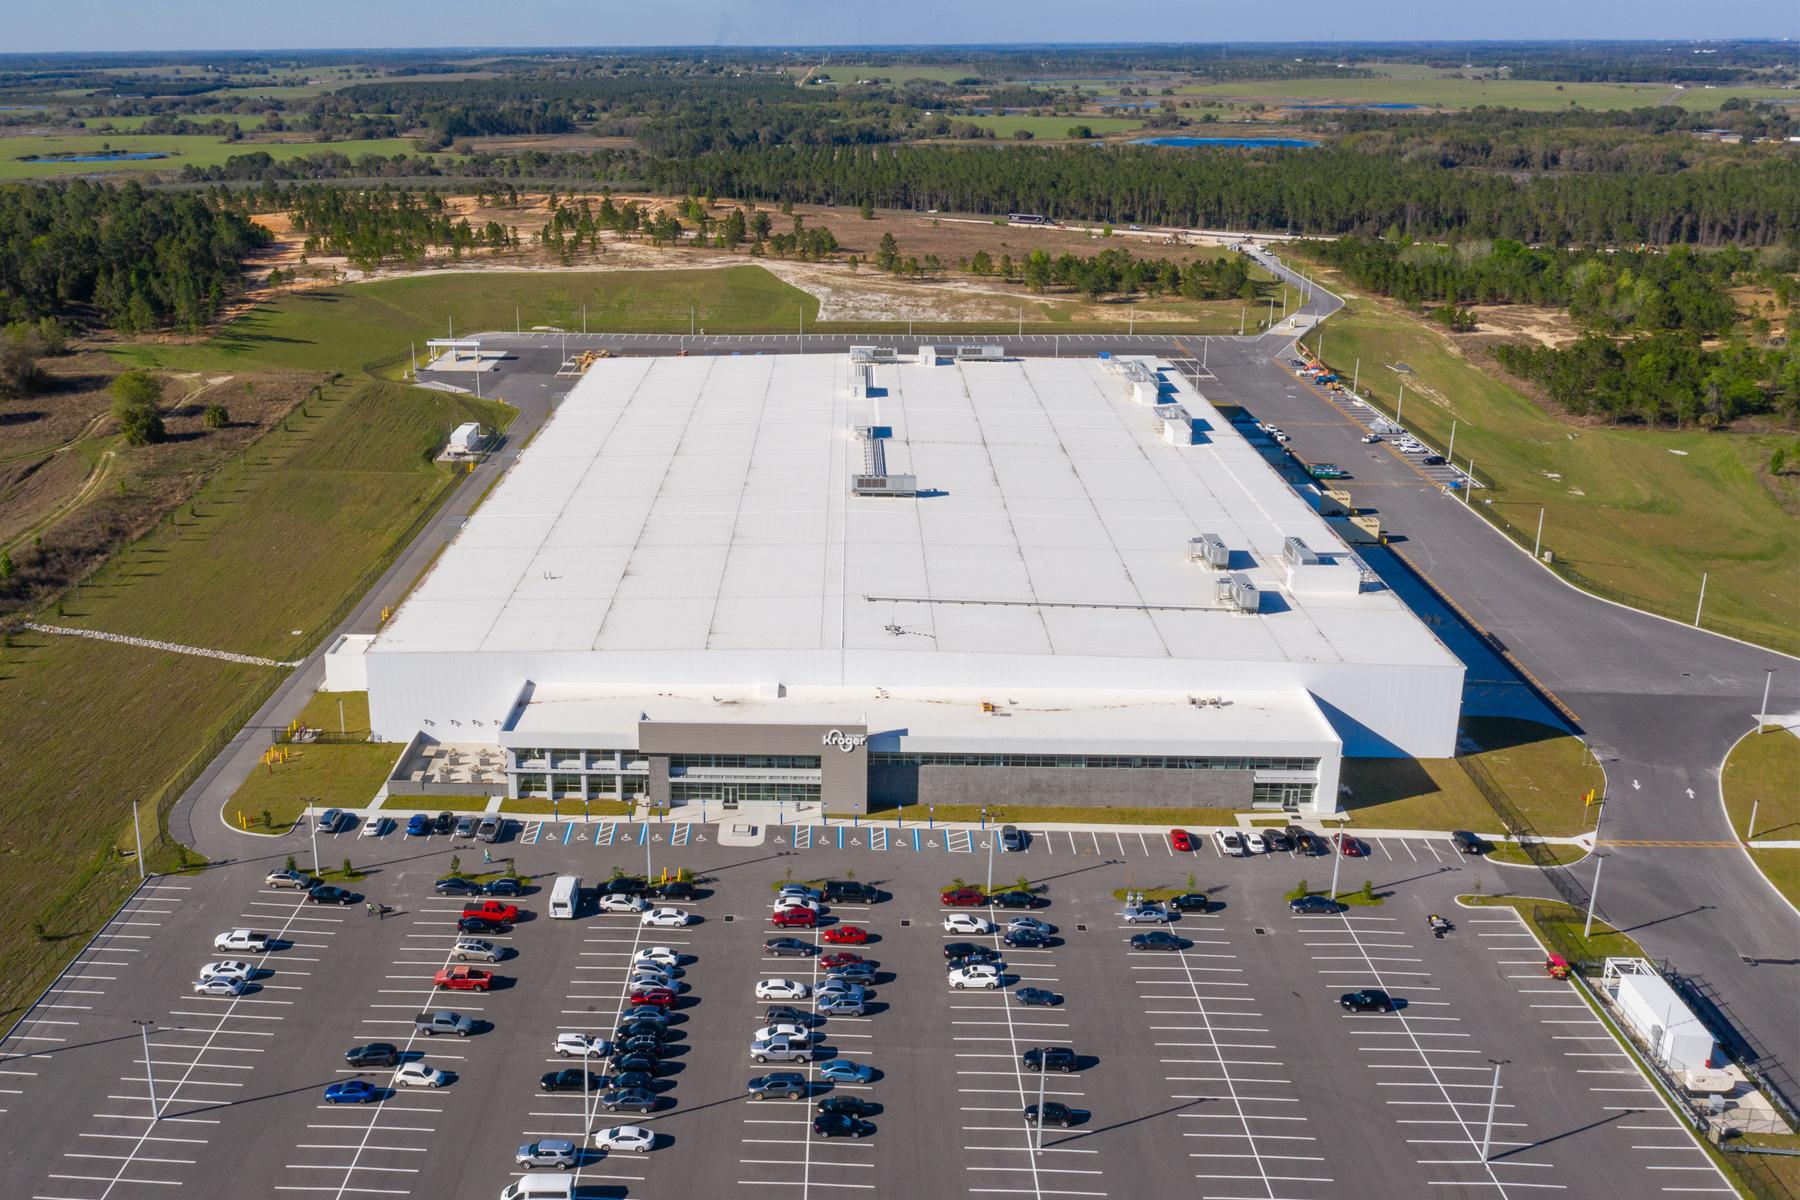 An aerial view of the Kroger distribution center in Groveland, Florida.